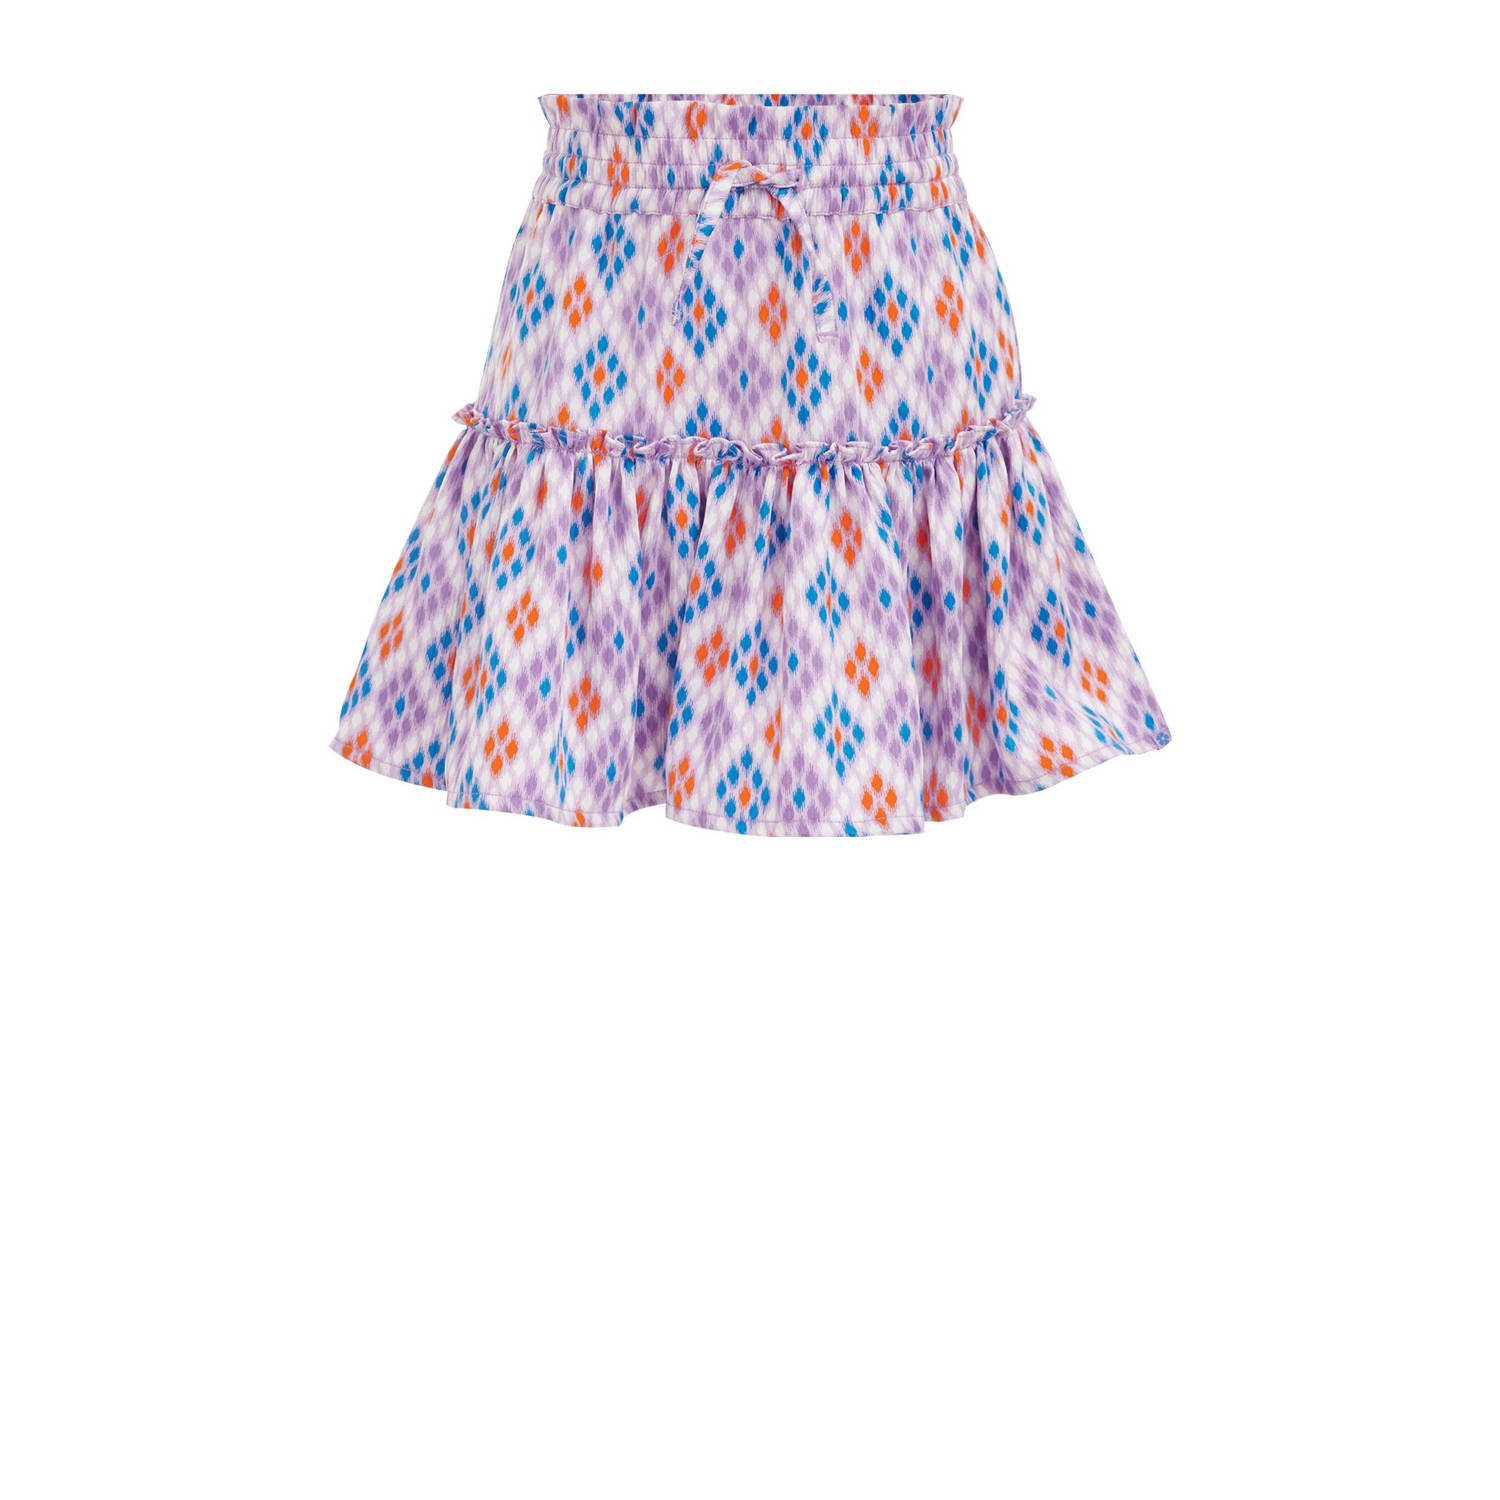 WE Fashion rok met all over print lila Paars Meisjes Gerecycled polyester 110 116